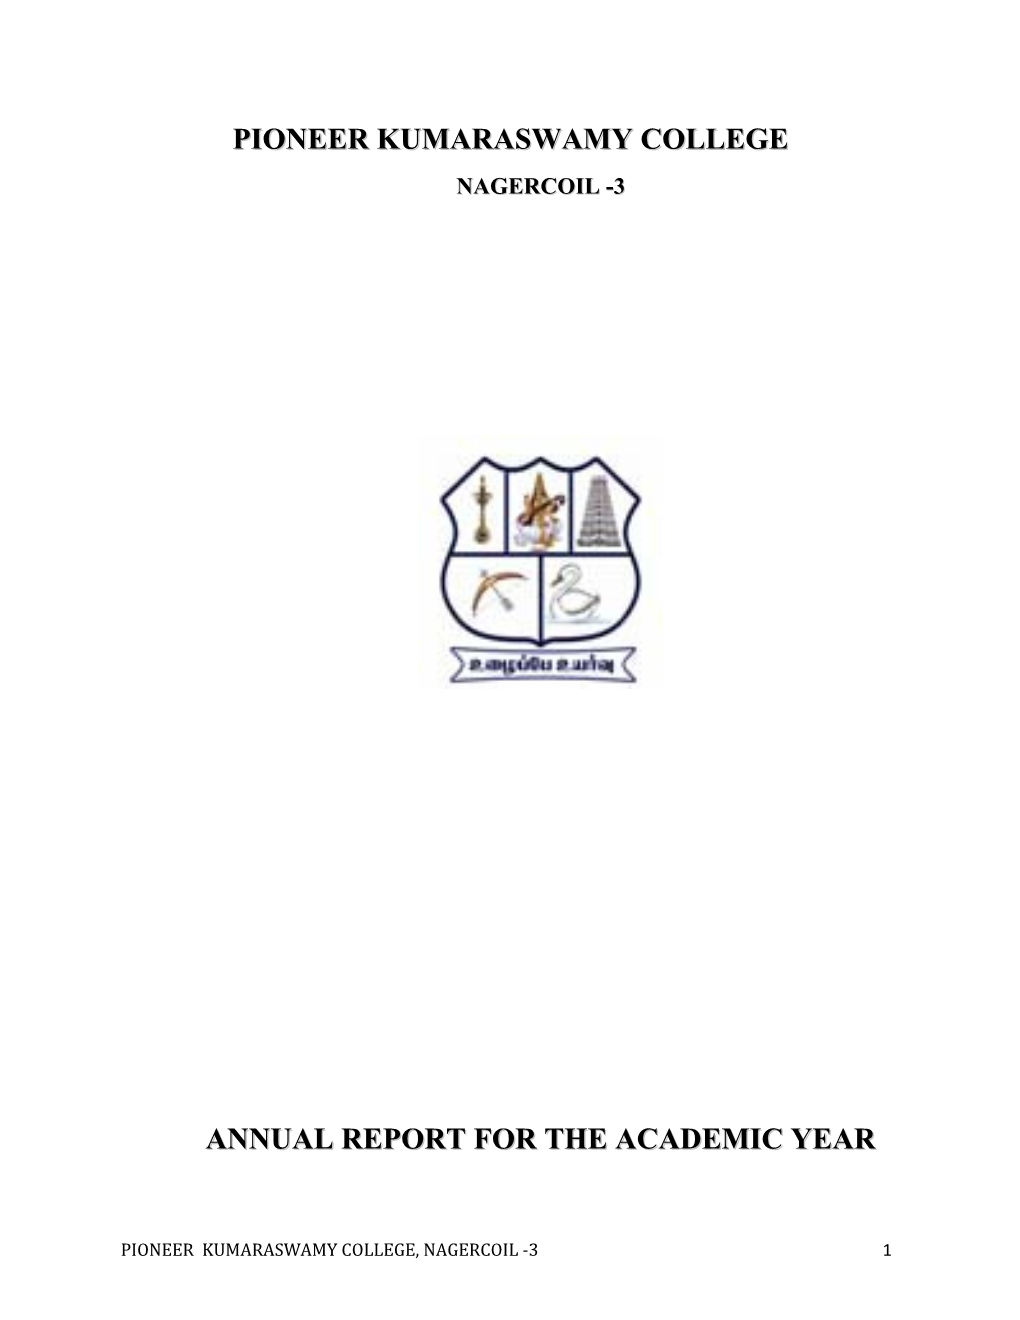 Annual Report for the Academic Year